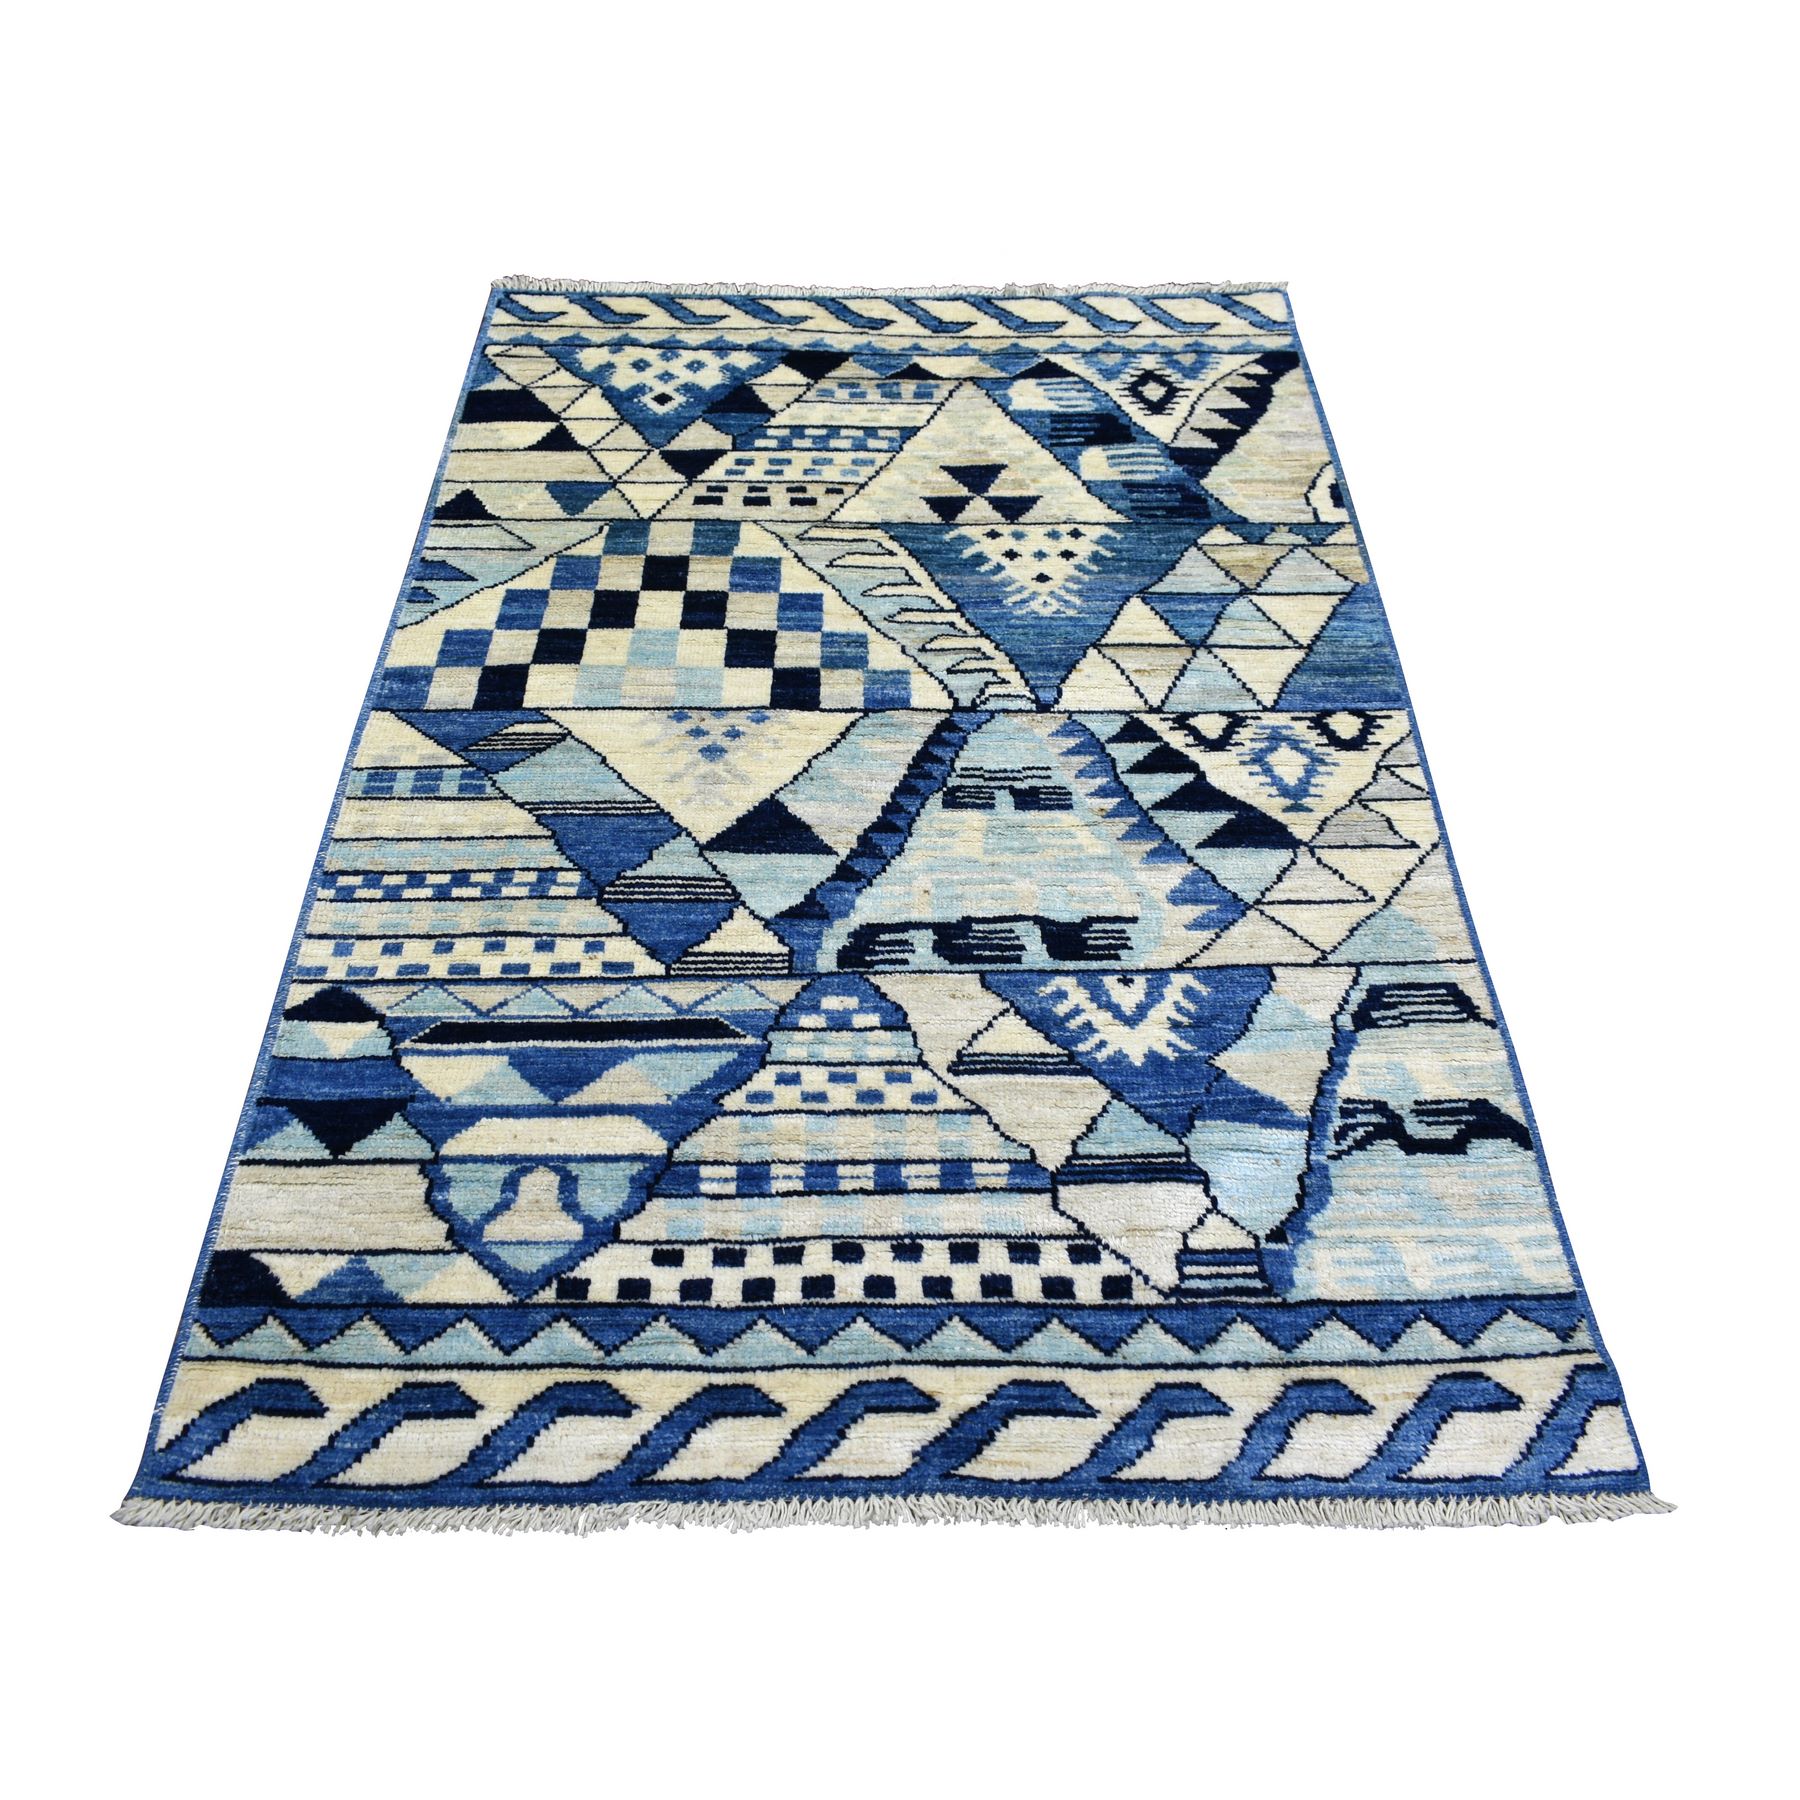 4'x6' Denim Blue, Hand Woven Anatolian Village Inspired with Little Triangles Design, Natural Dyes Soft Wool, Oriental Rug 